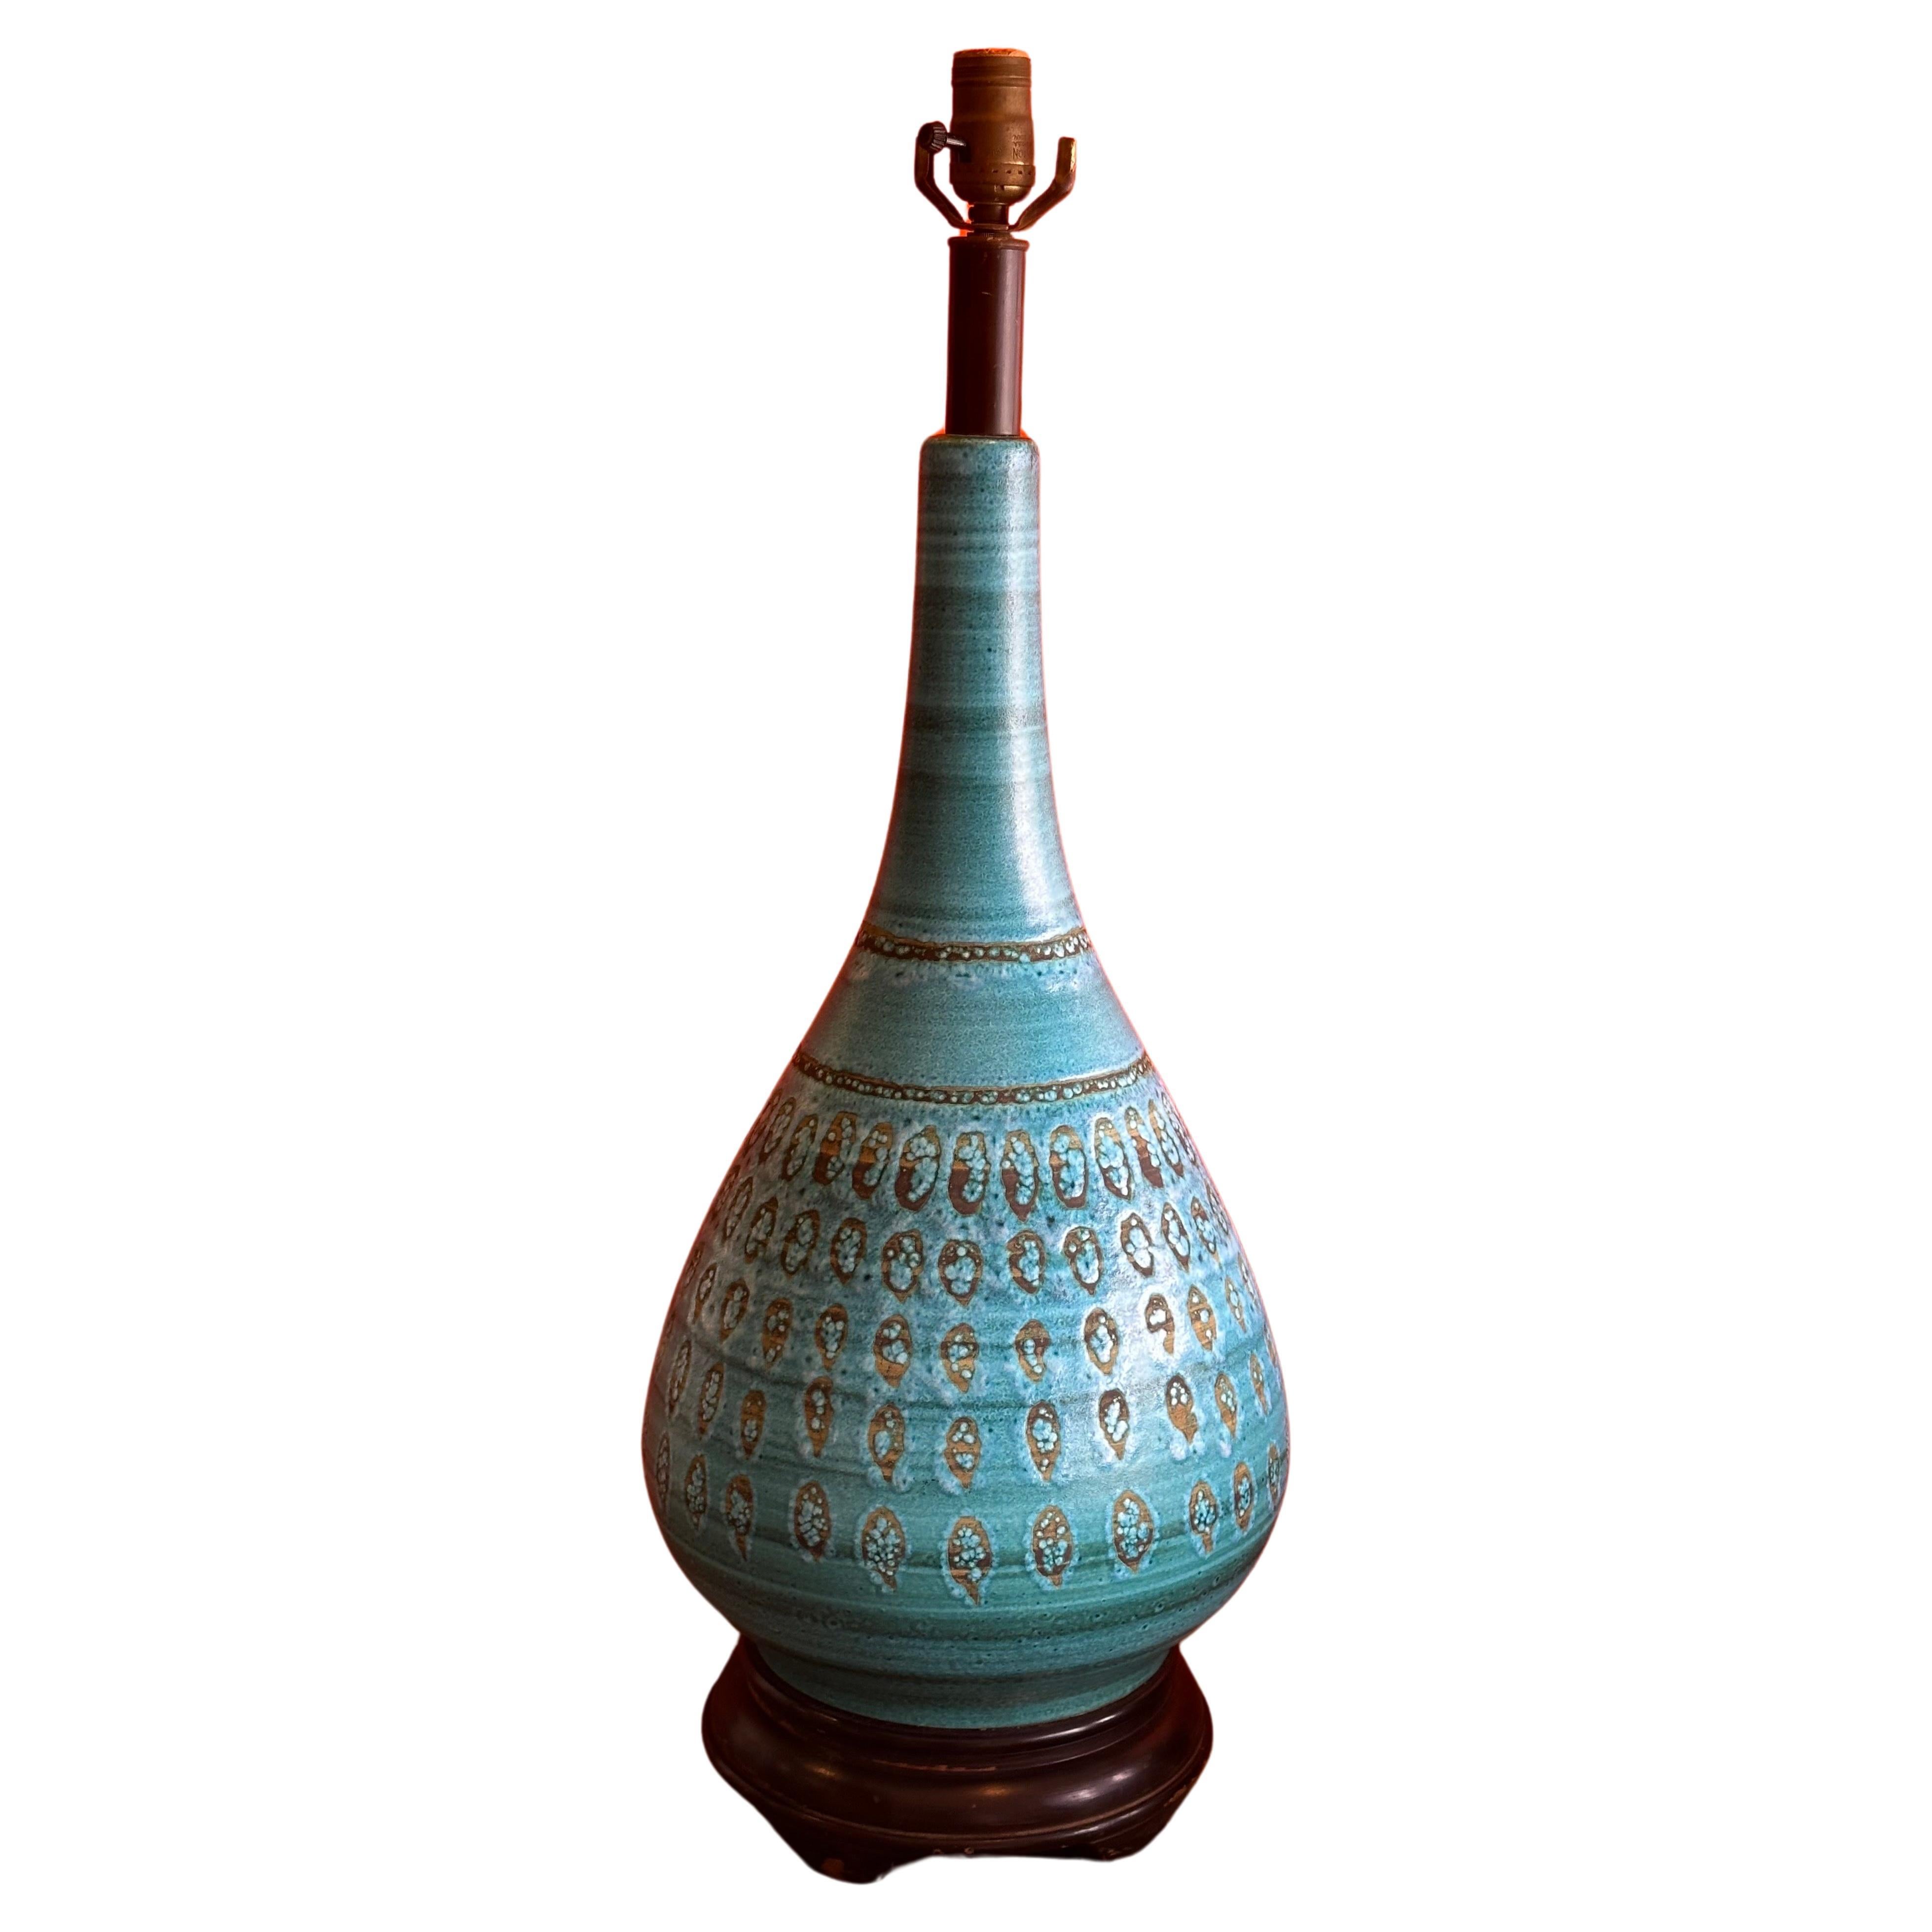 Monumental turquoise glazed ceramic lamp by Aldo Londi for Bitossi, circa 1960s.  The lamp is in very good working condition and measures 11.5